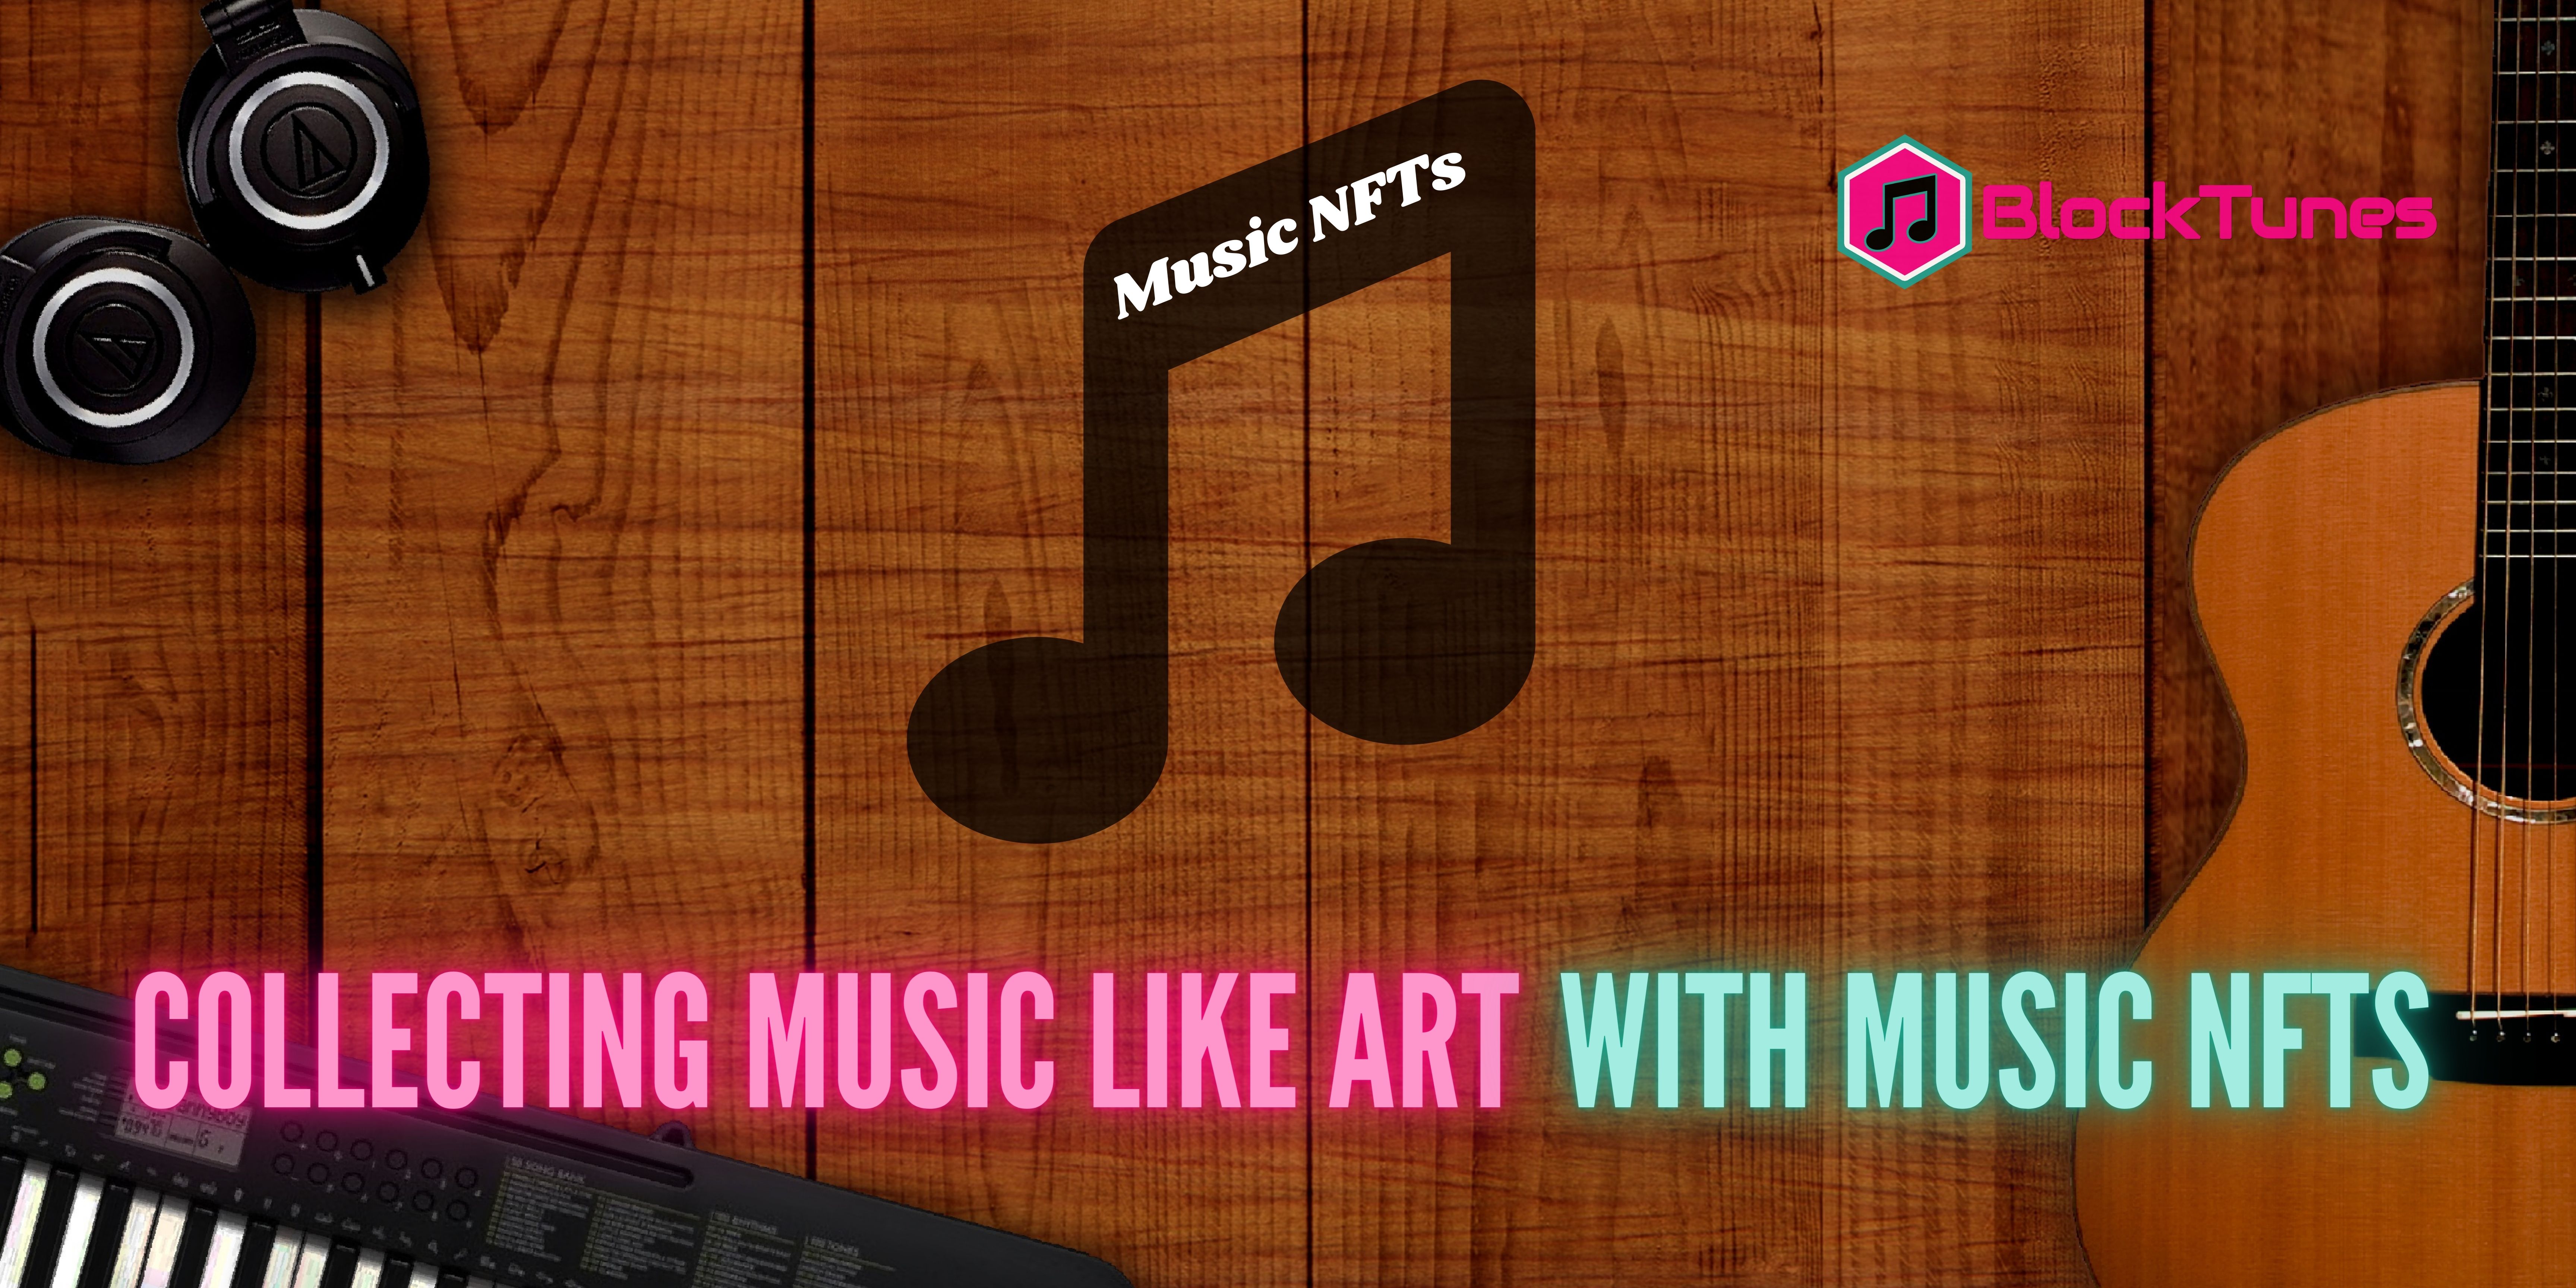 @blocktunes/collecting-music-as-art-the-rise-of-music-nfts